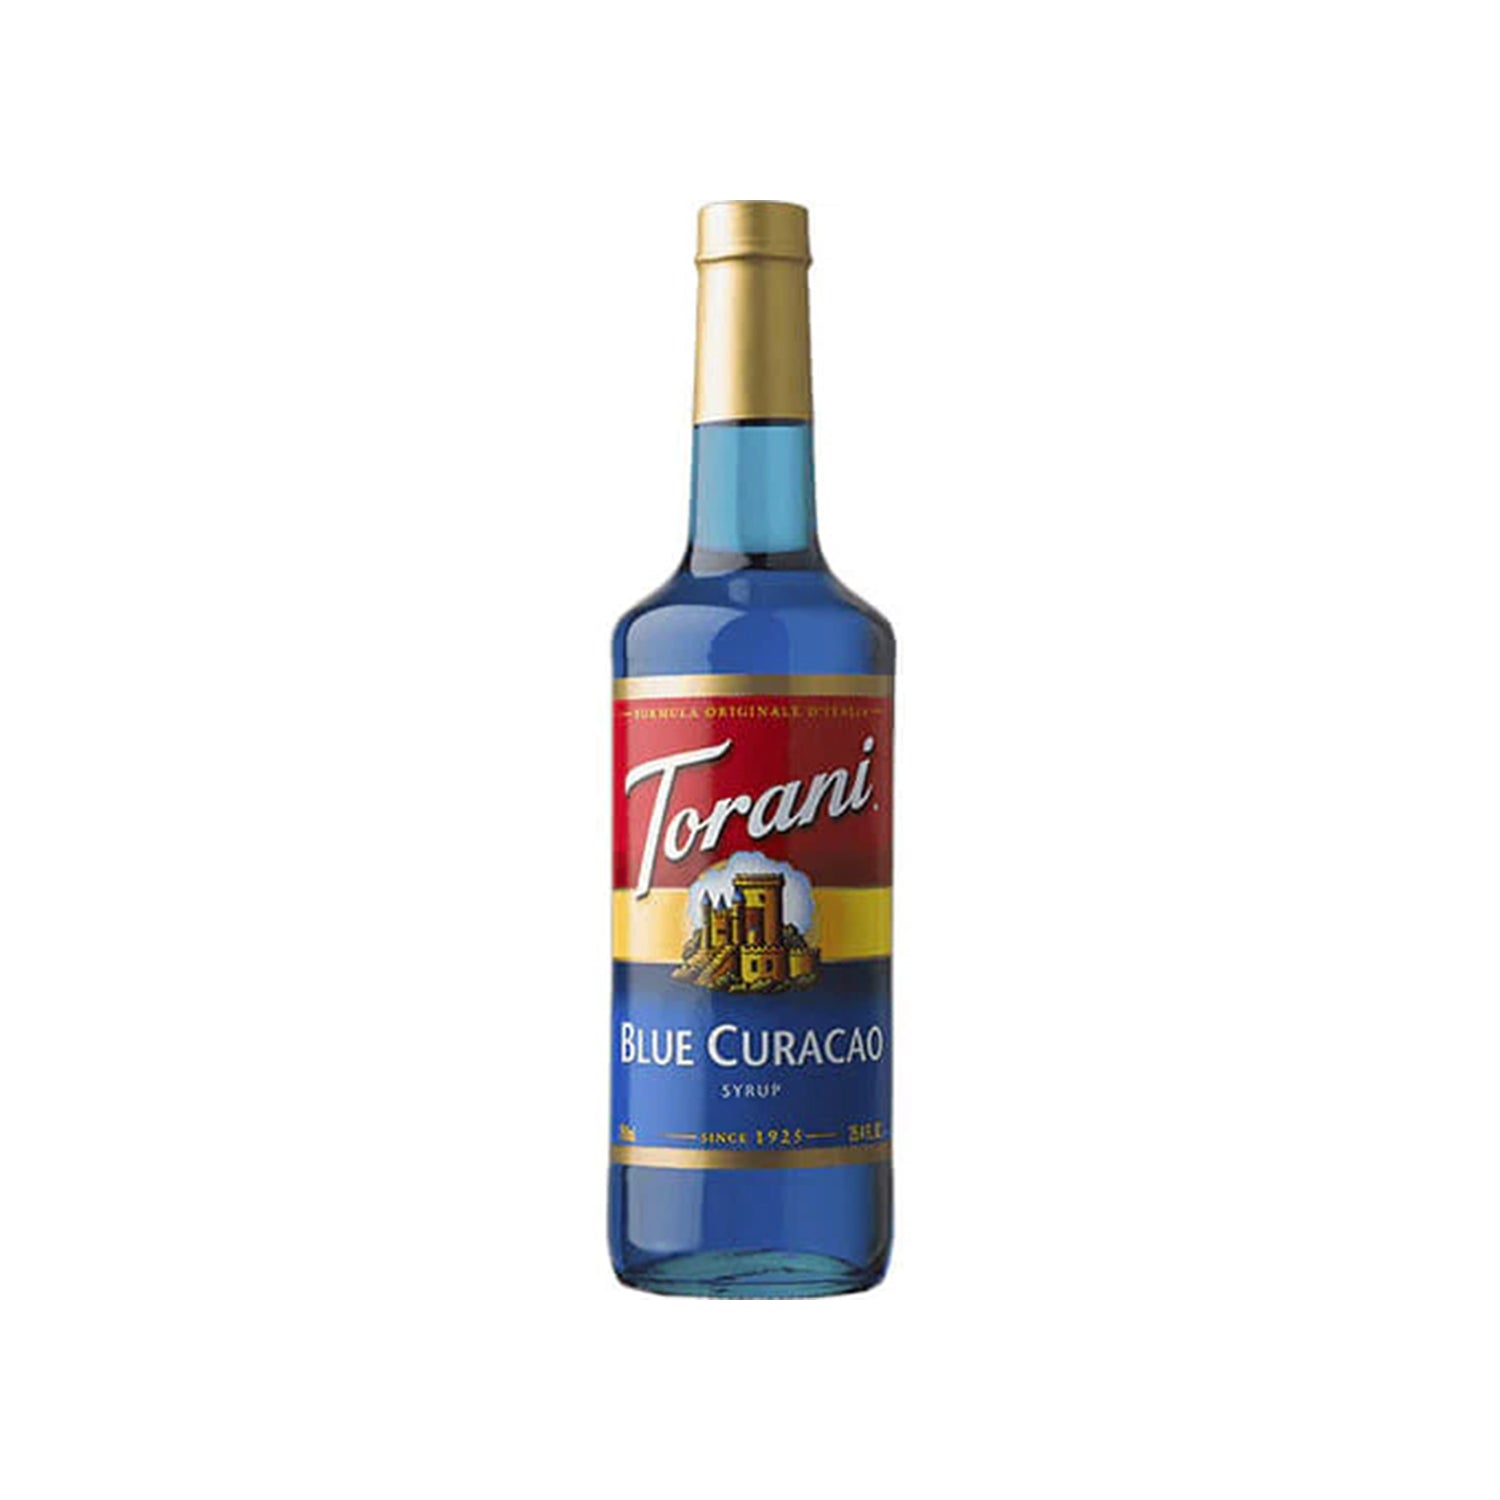 Torani Blue Curacao Syrup in clear 750mL Bottle